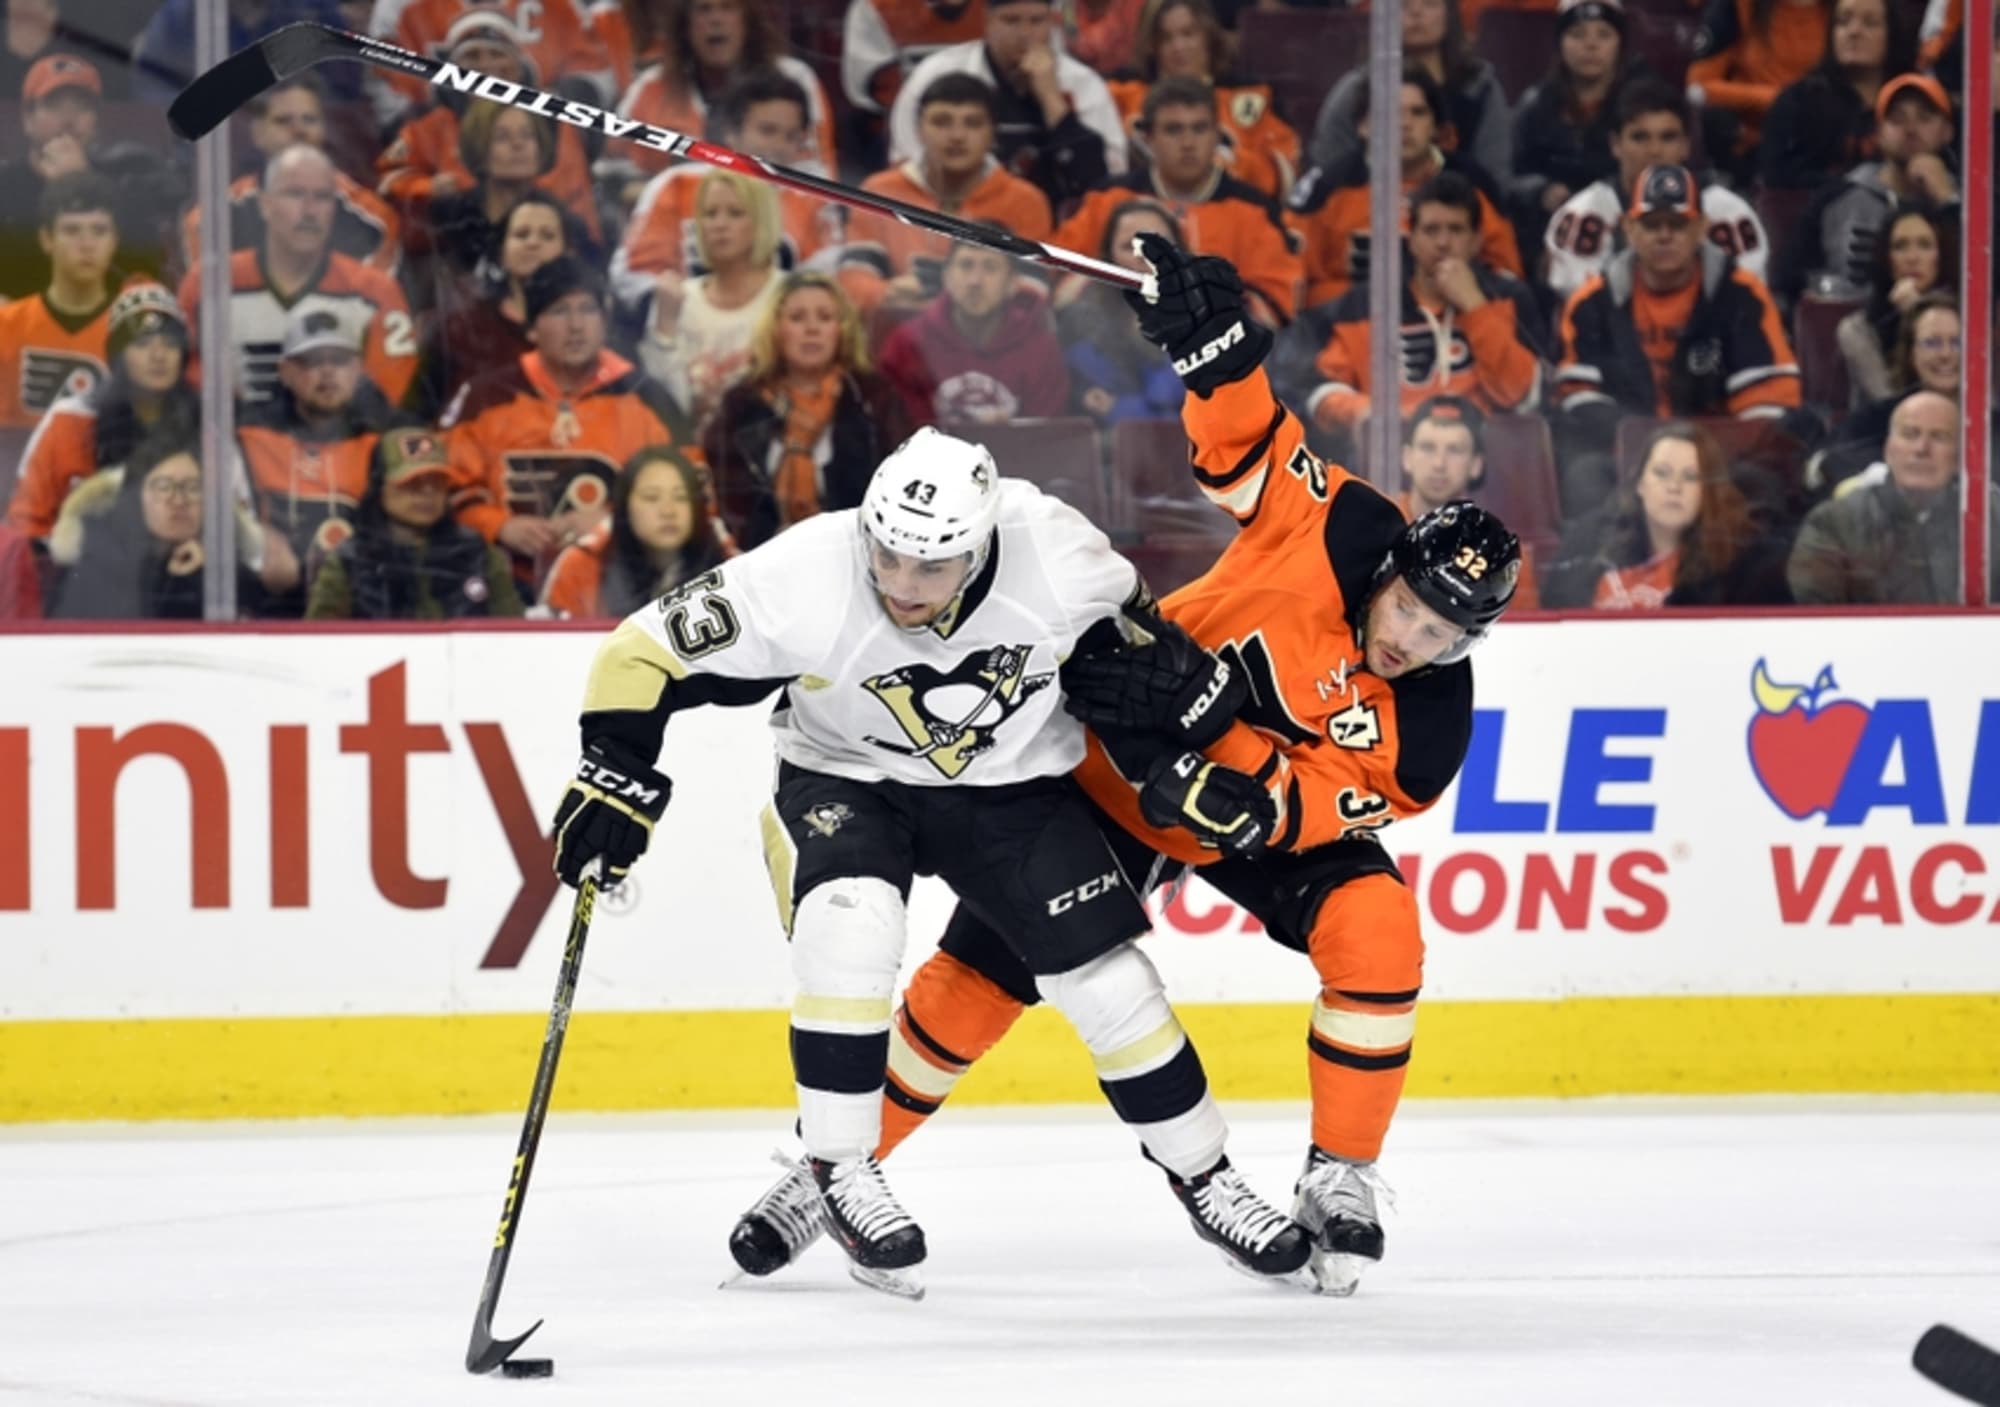 Penguins vs. Islanders, Game 64: Lines, Notes & How to Watch